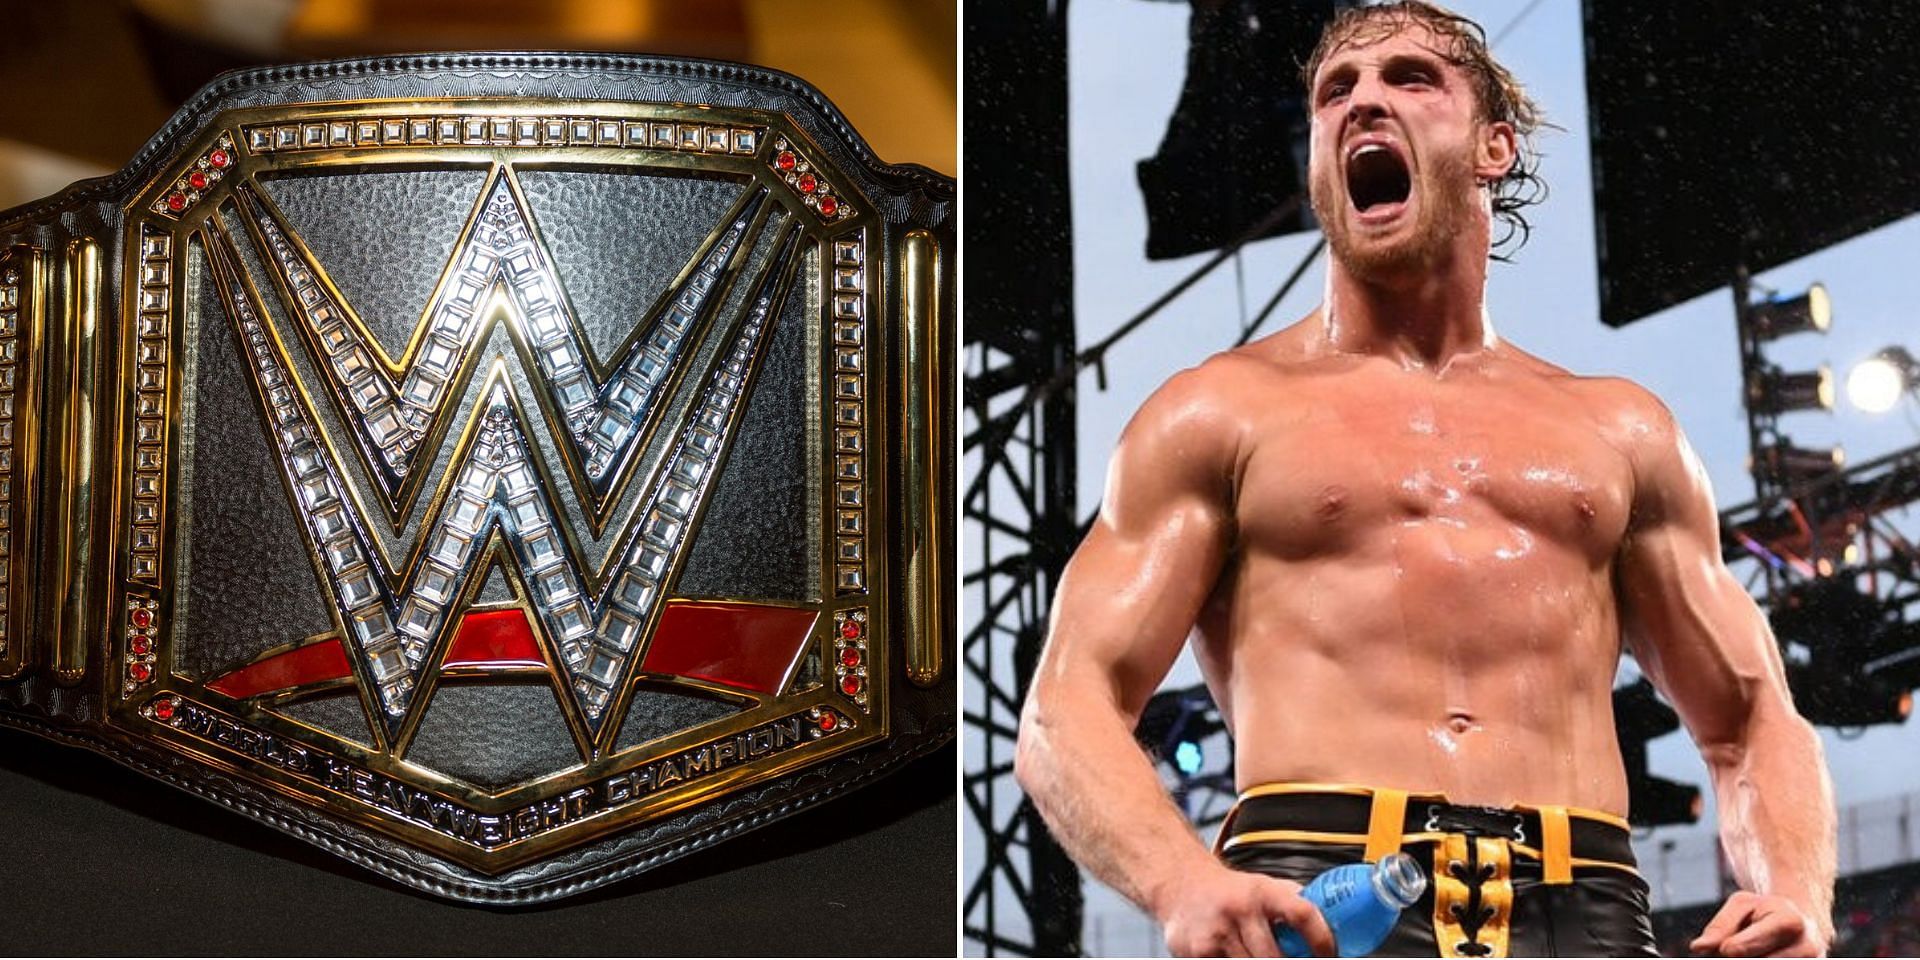 Could we see Logan Paul as WWE Champion someday?